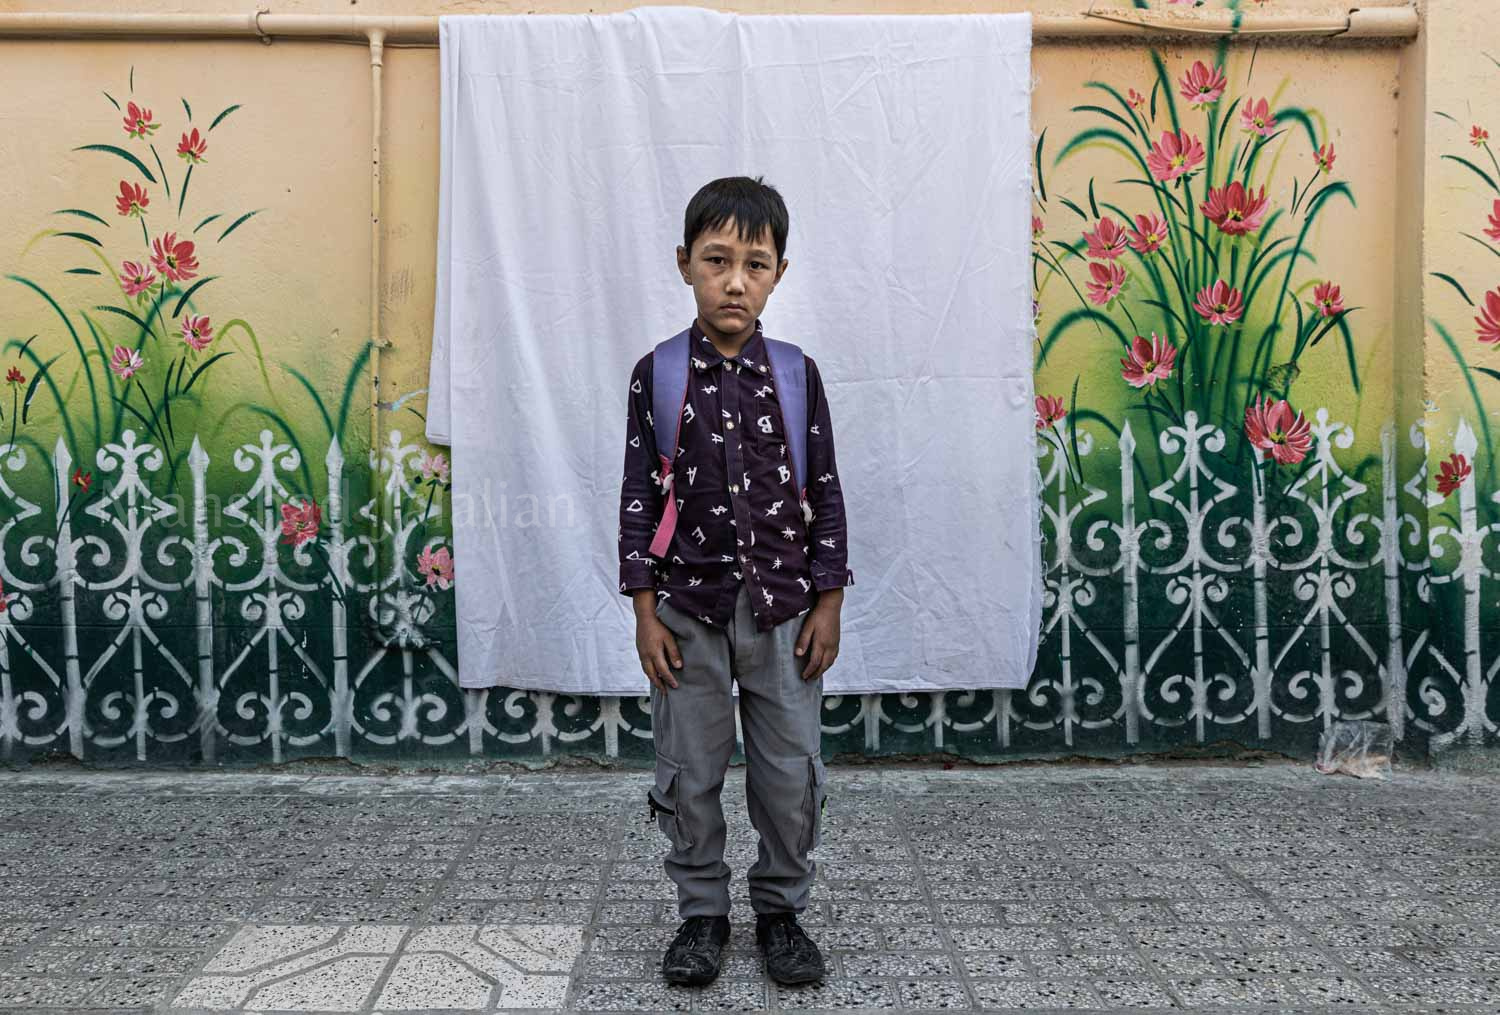 Mohsen Mohseni 10-year-old moved 8 months ago from Ghalenow at Kabul, Afghanistan.